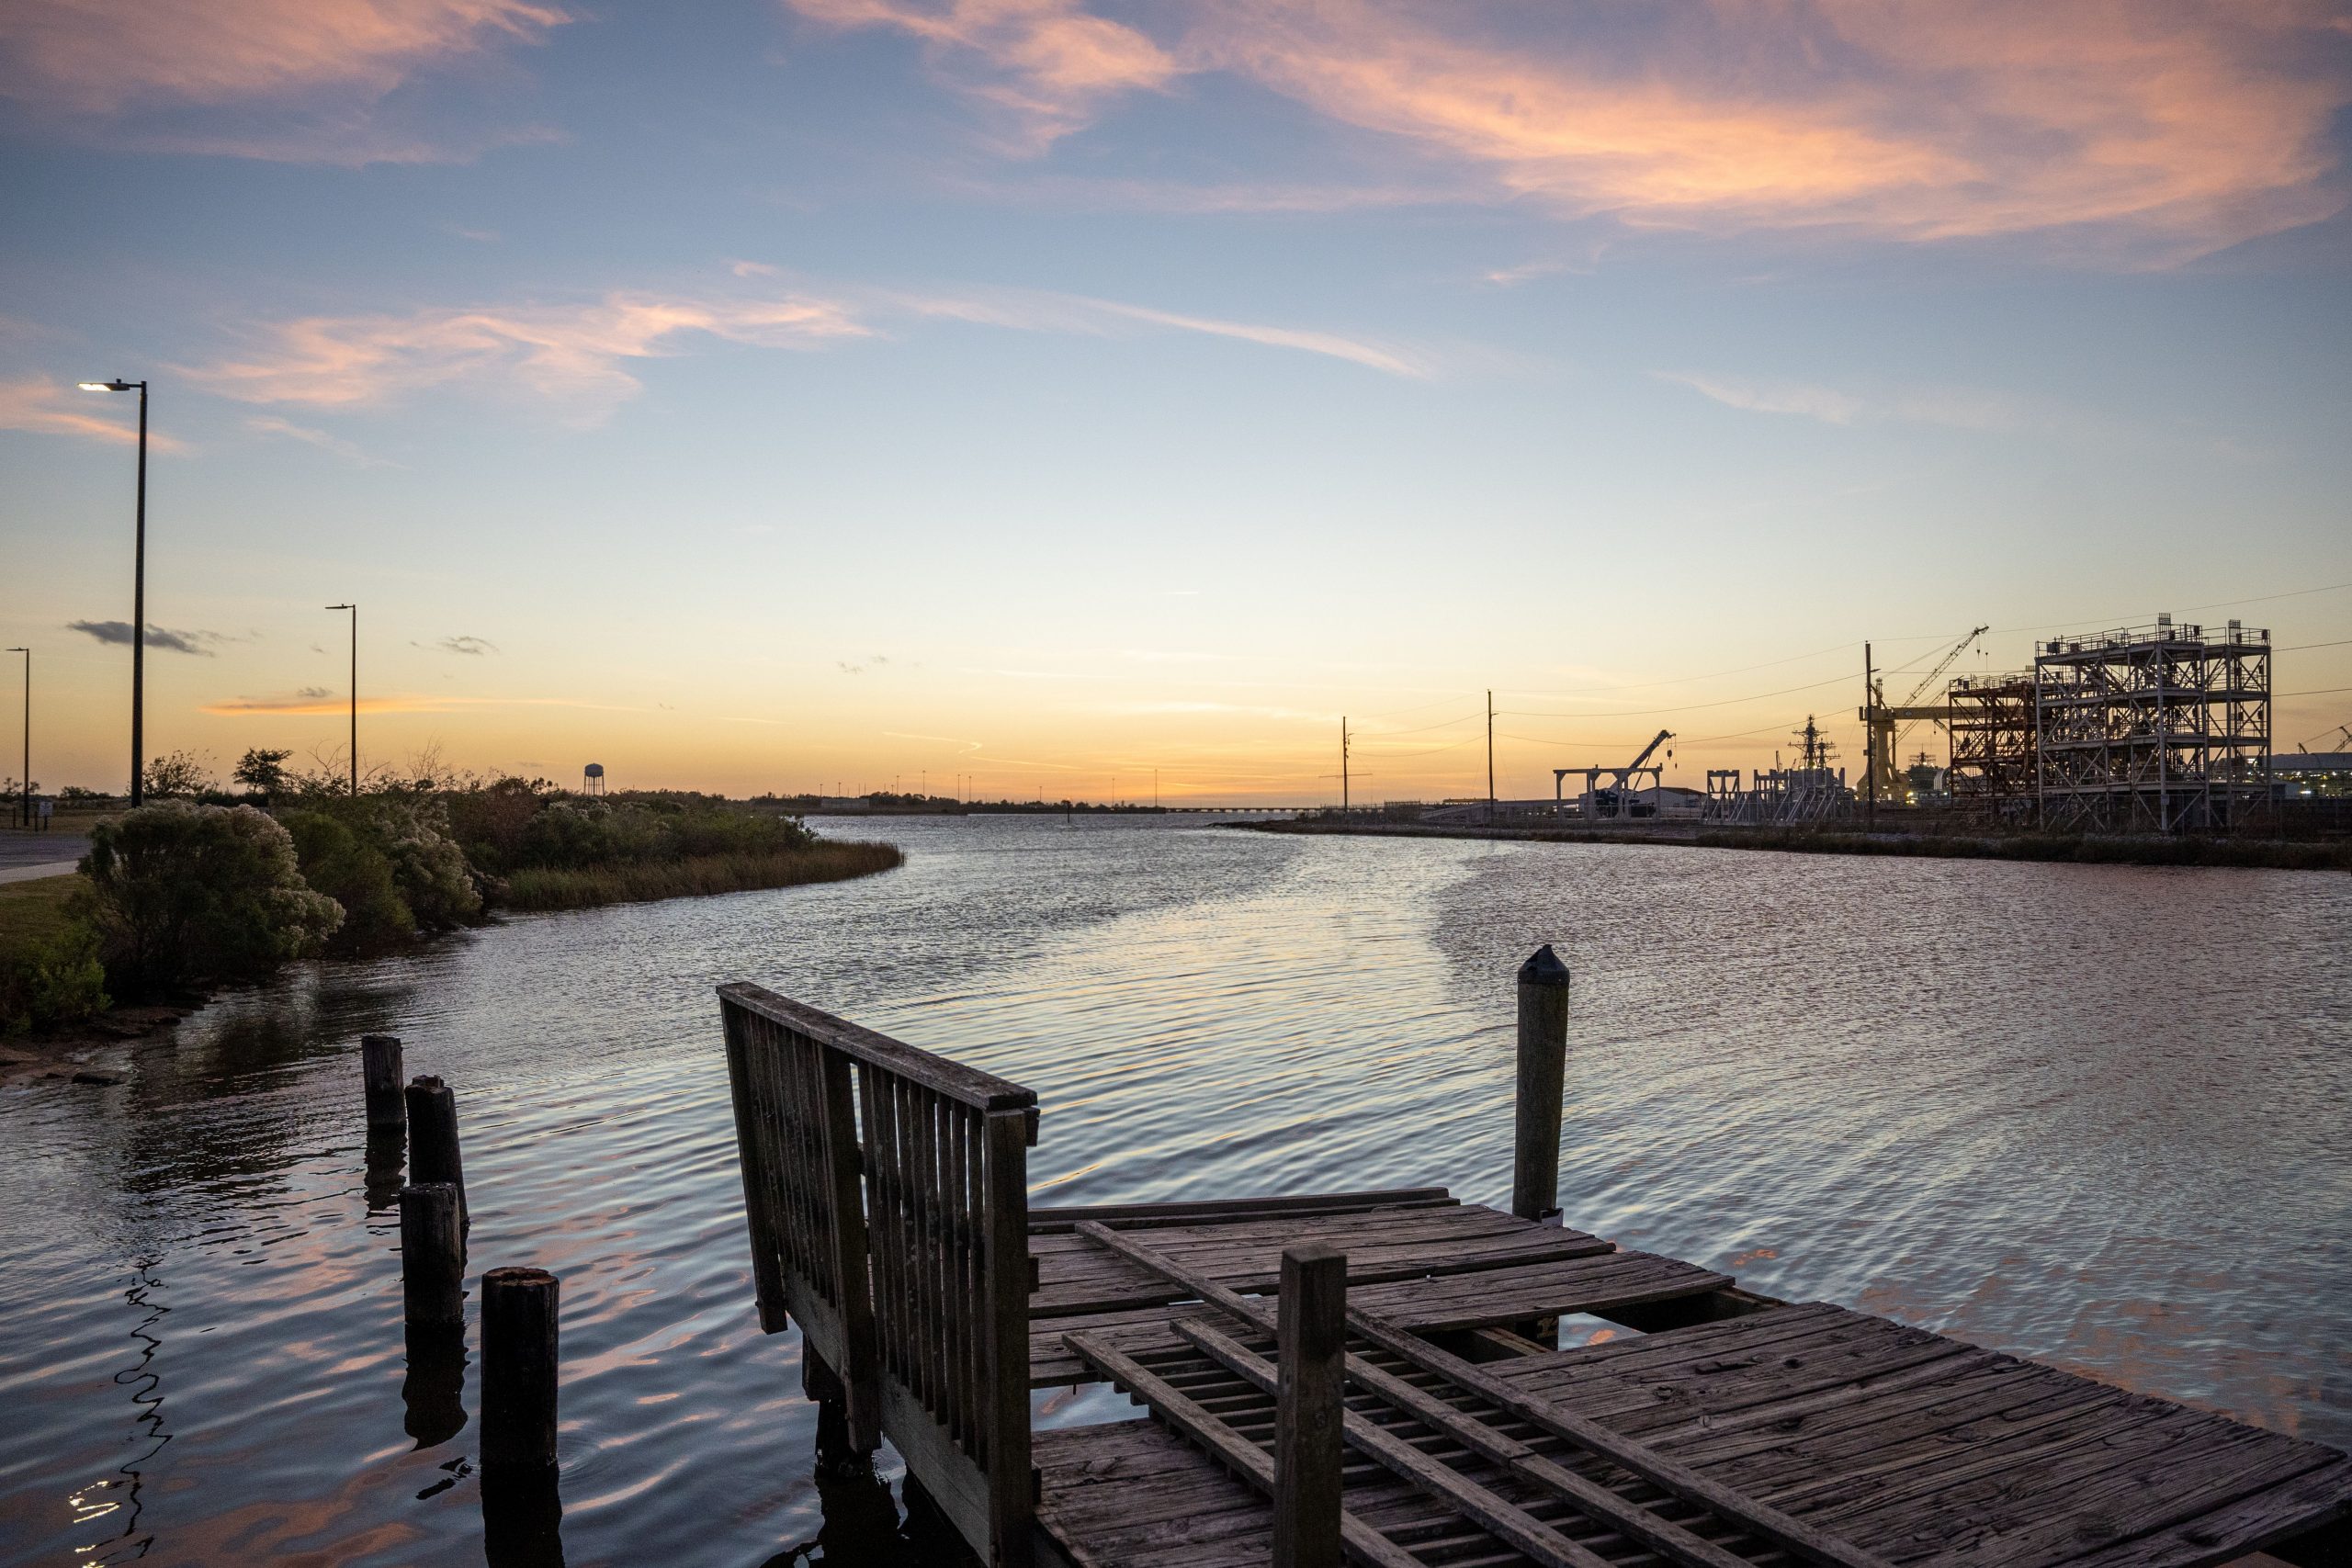 An aerial view of a seaport during sunset in Moss Point, Mississippi, USA